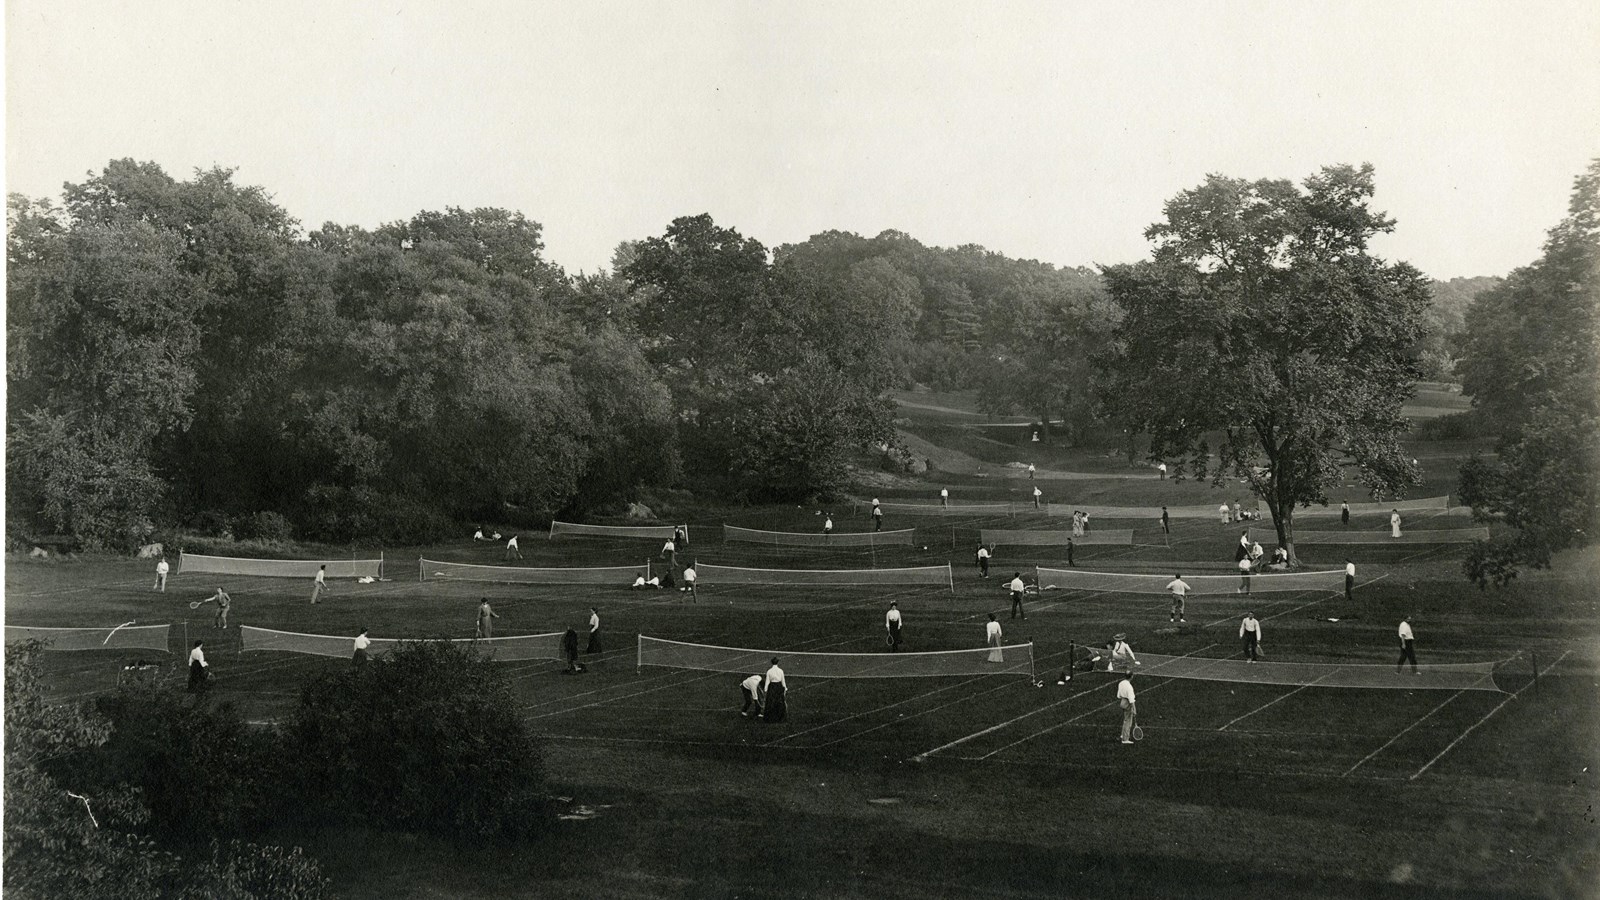 Black and white of many tennis courts and people on grassy area surrounded by trees